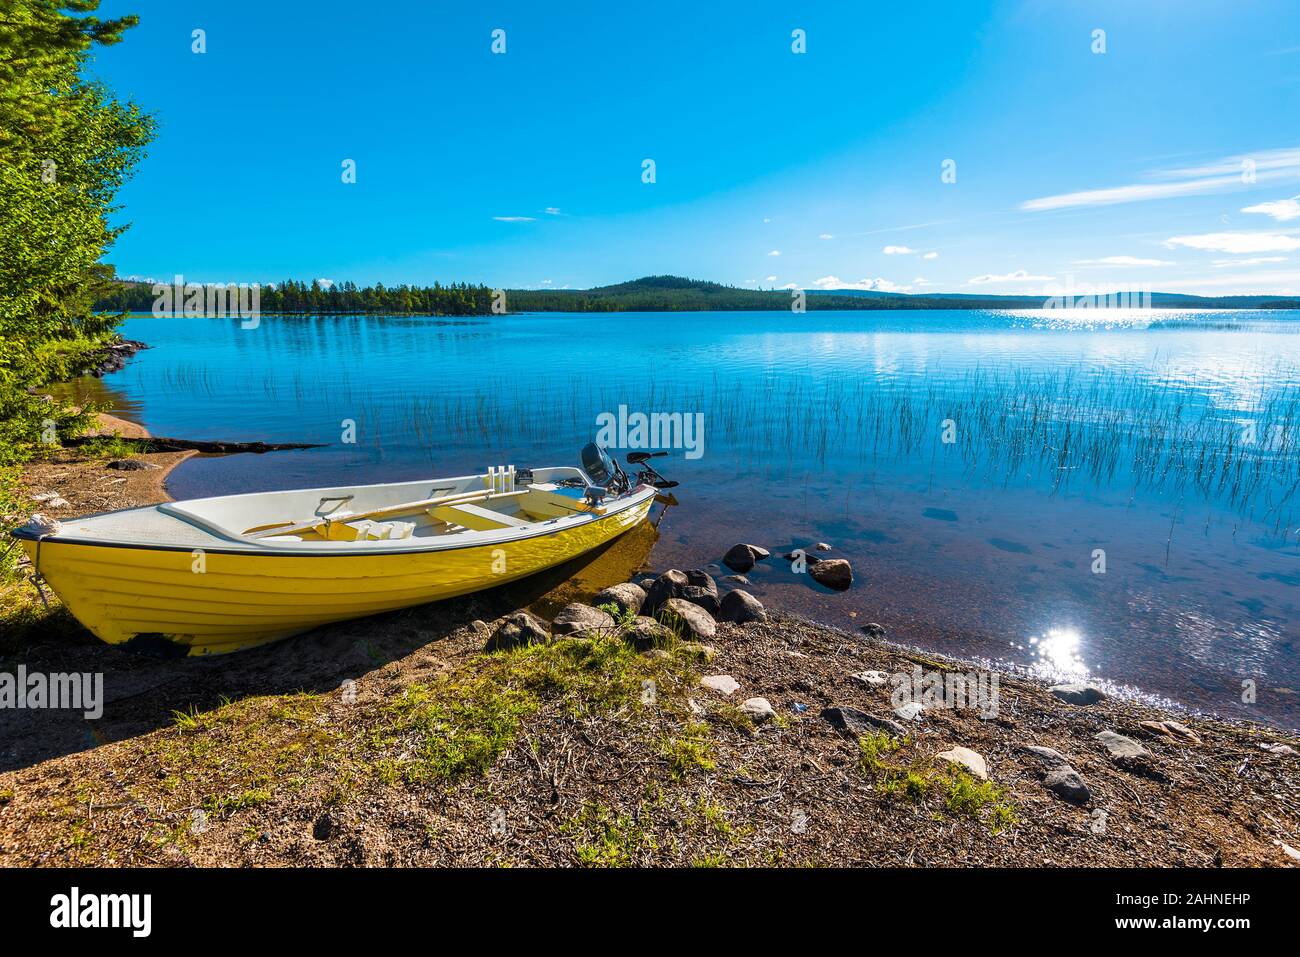 The motor boat in the border of Siebdniesjavrrie lake Swedish Lapland. The sun is reflecting in the water. Vasterbotten county, Norrland, Sweden. Stock Photo